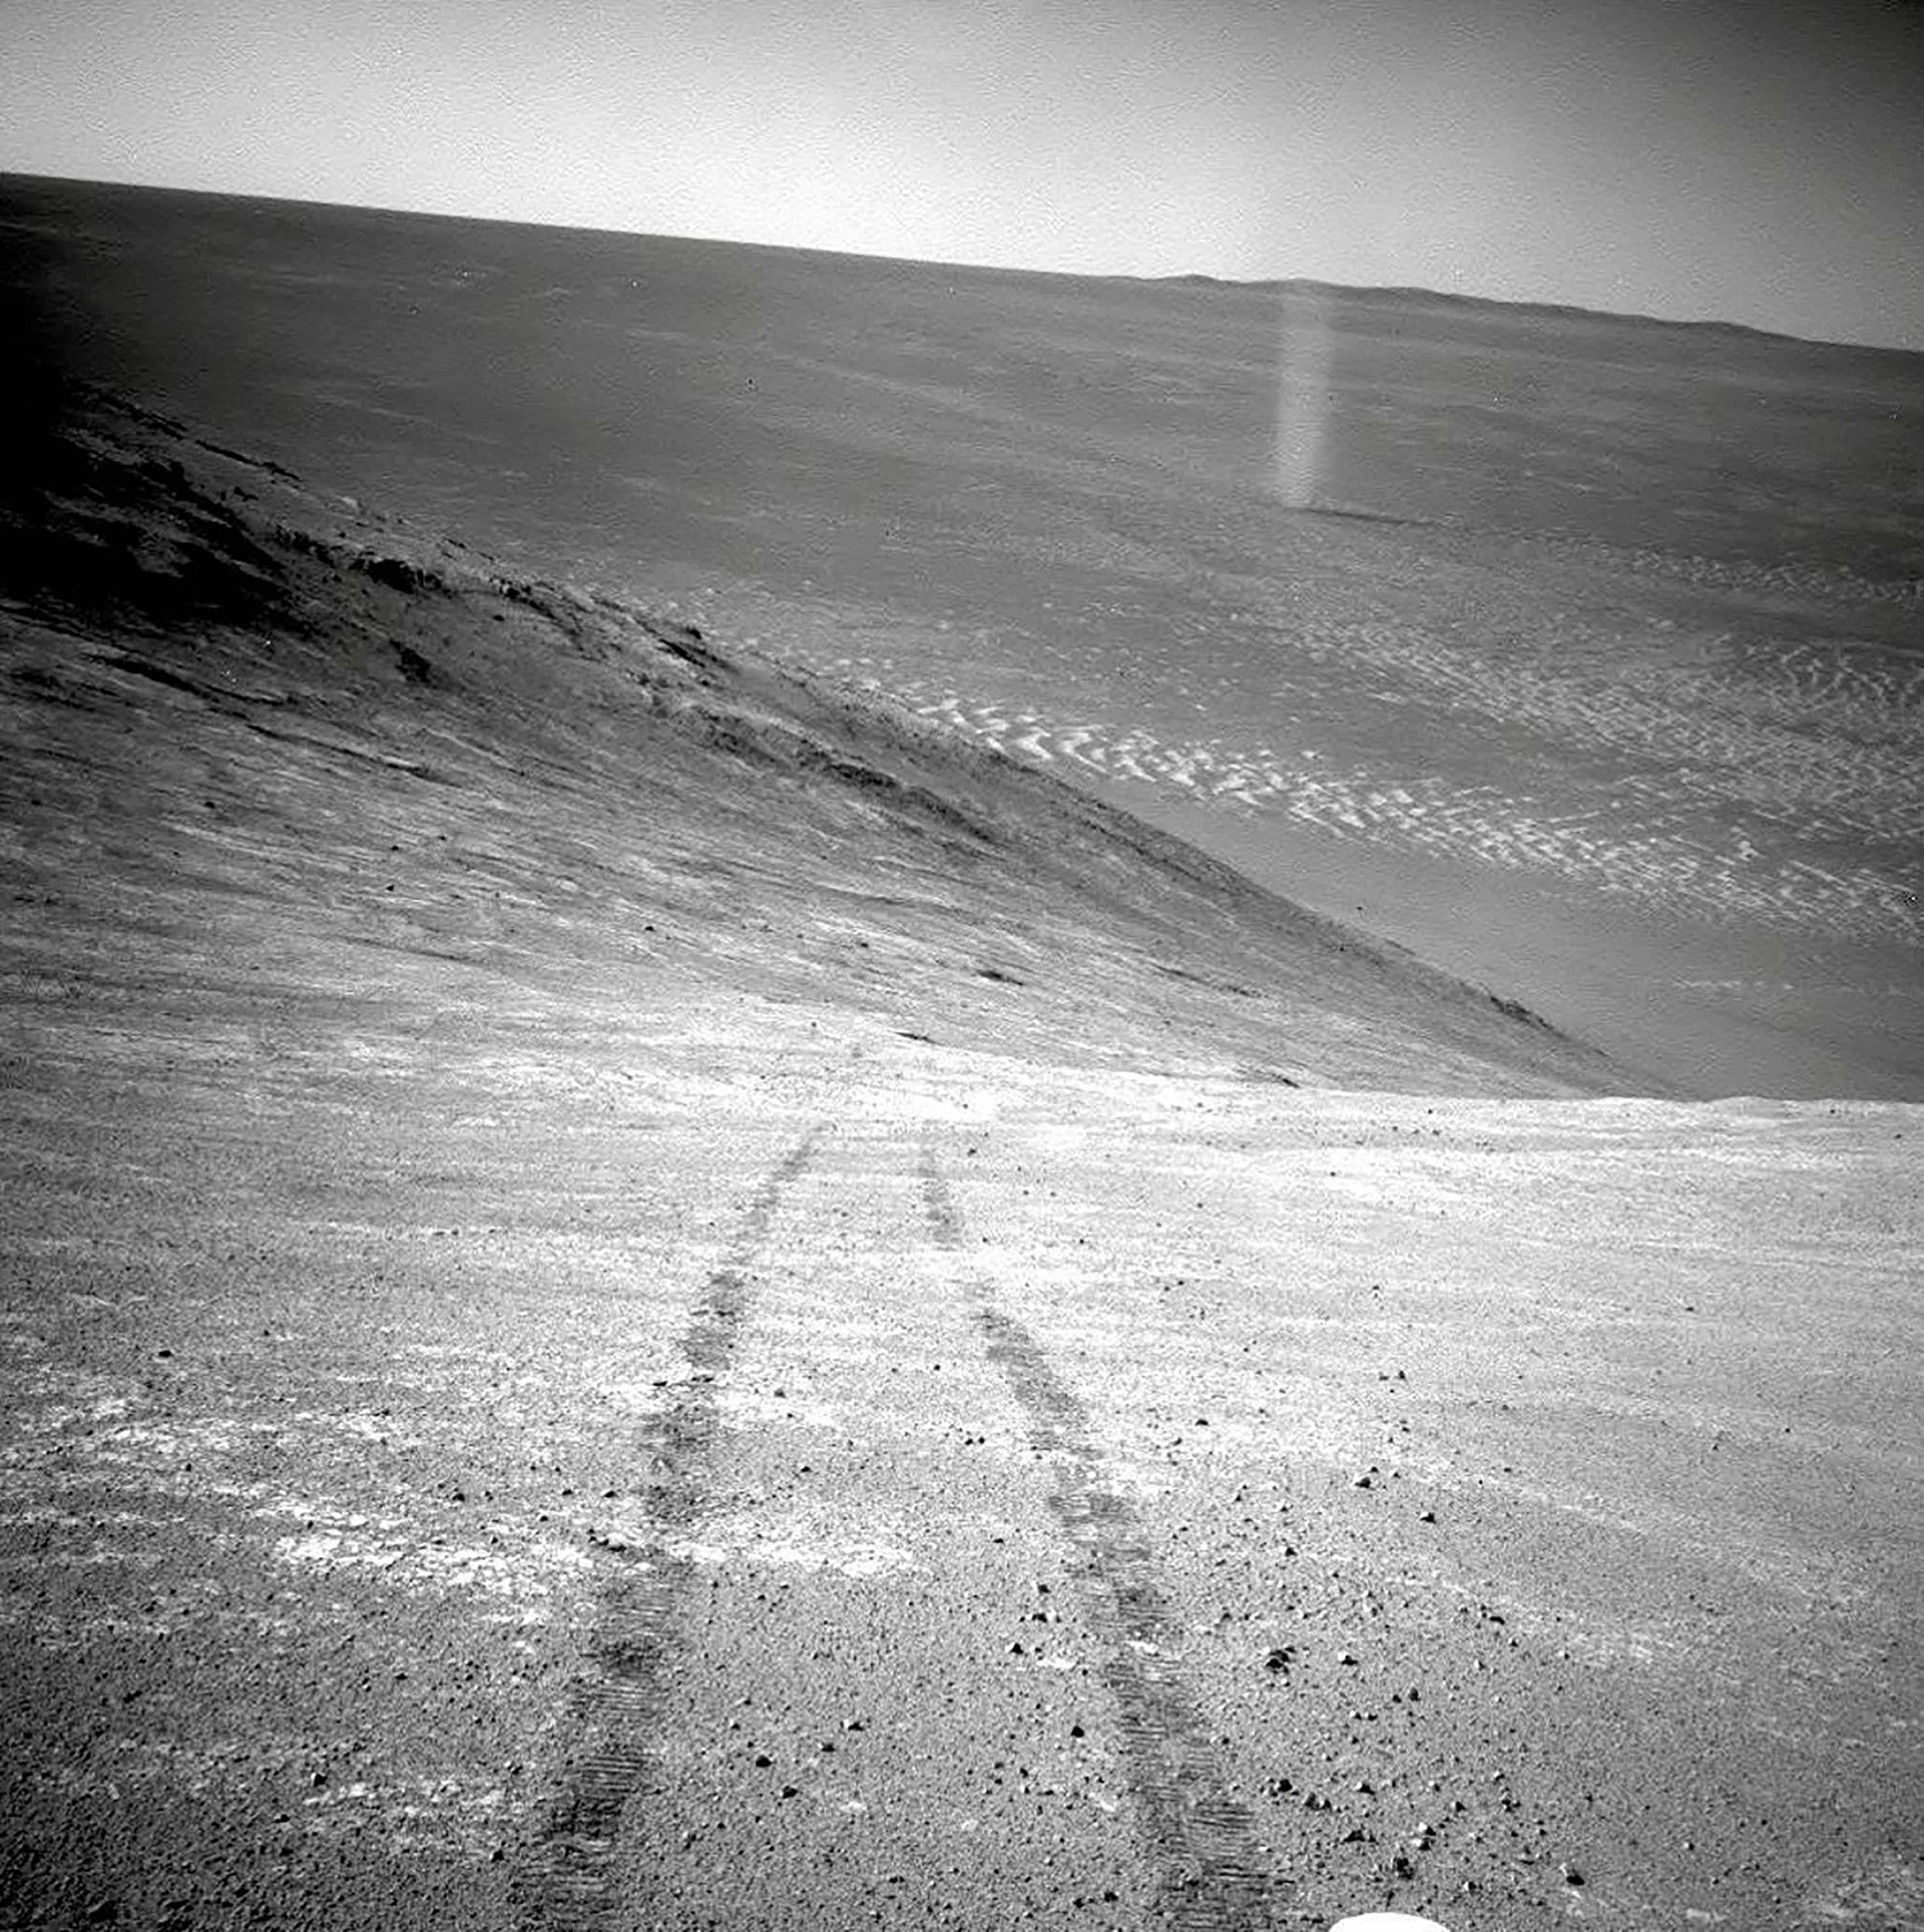 This photograph made available by NASA in March 2016 shows a dust devil in a valley on Mars, seen by the Opportunity rover perched on a ridge. The view looks back at the rover's tracks leading up the north-facing slope of 